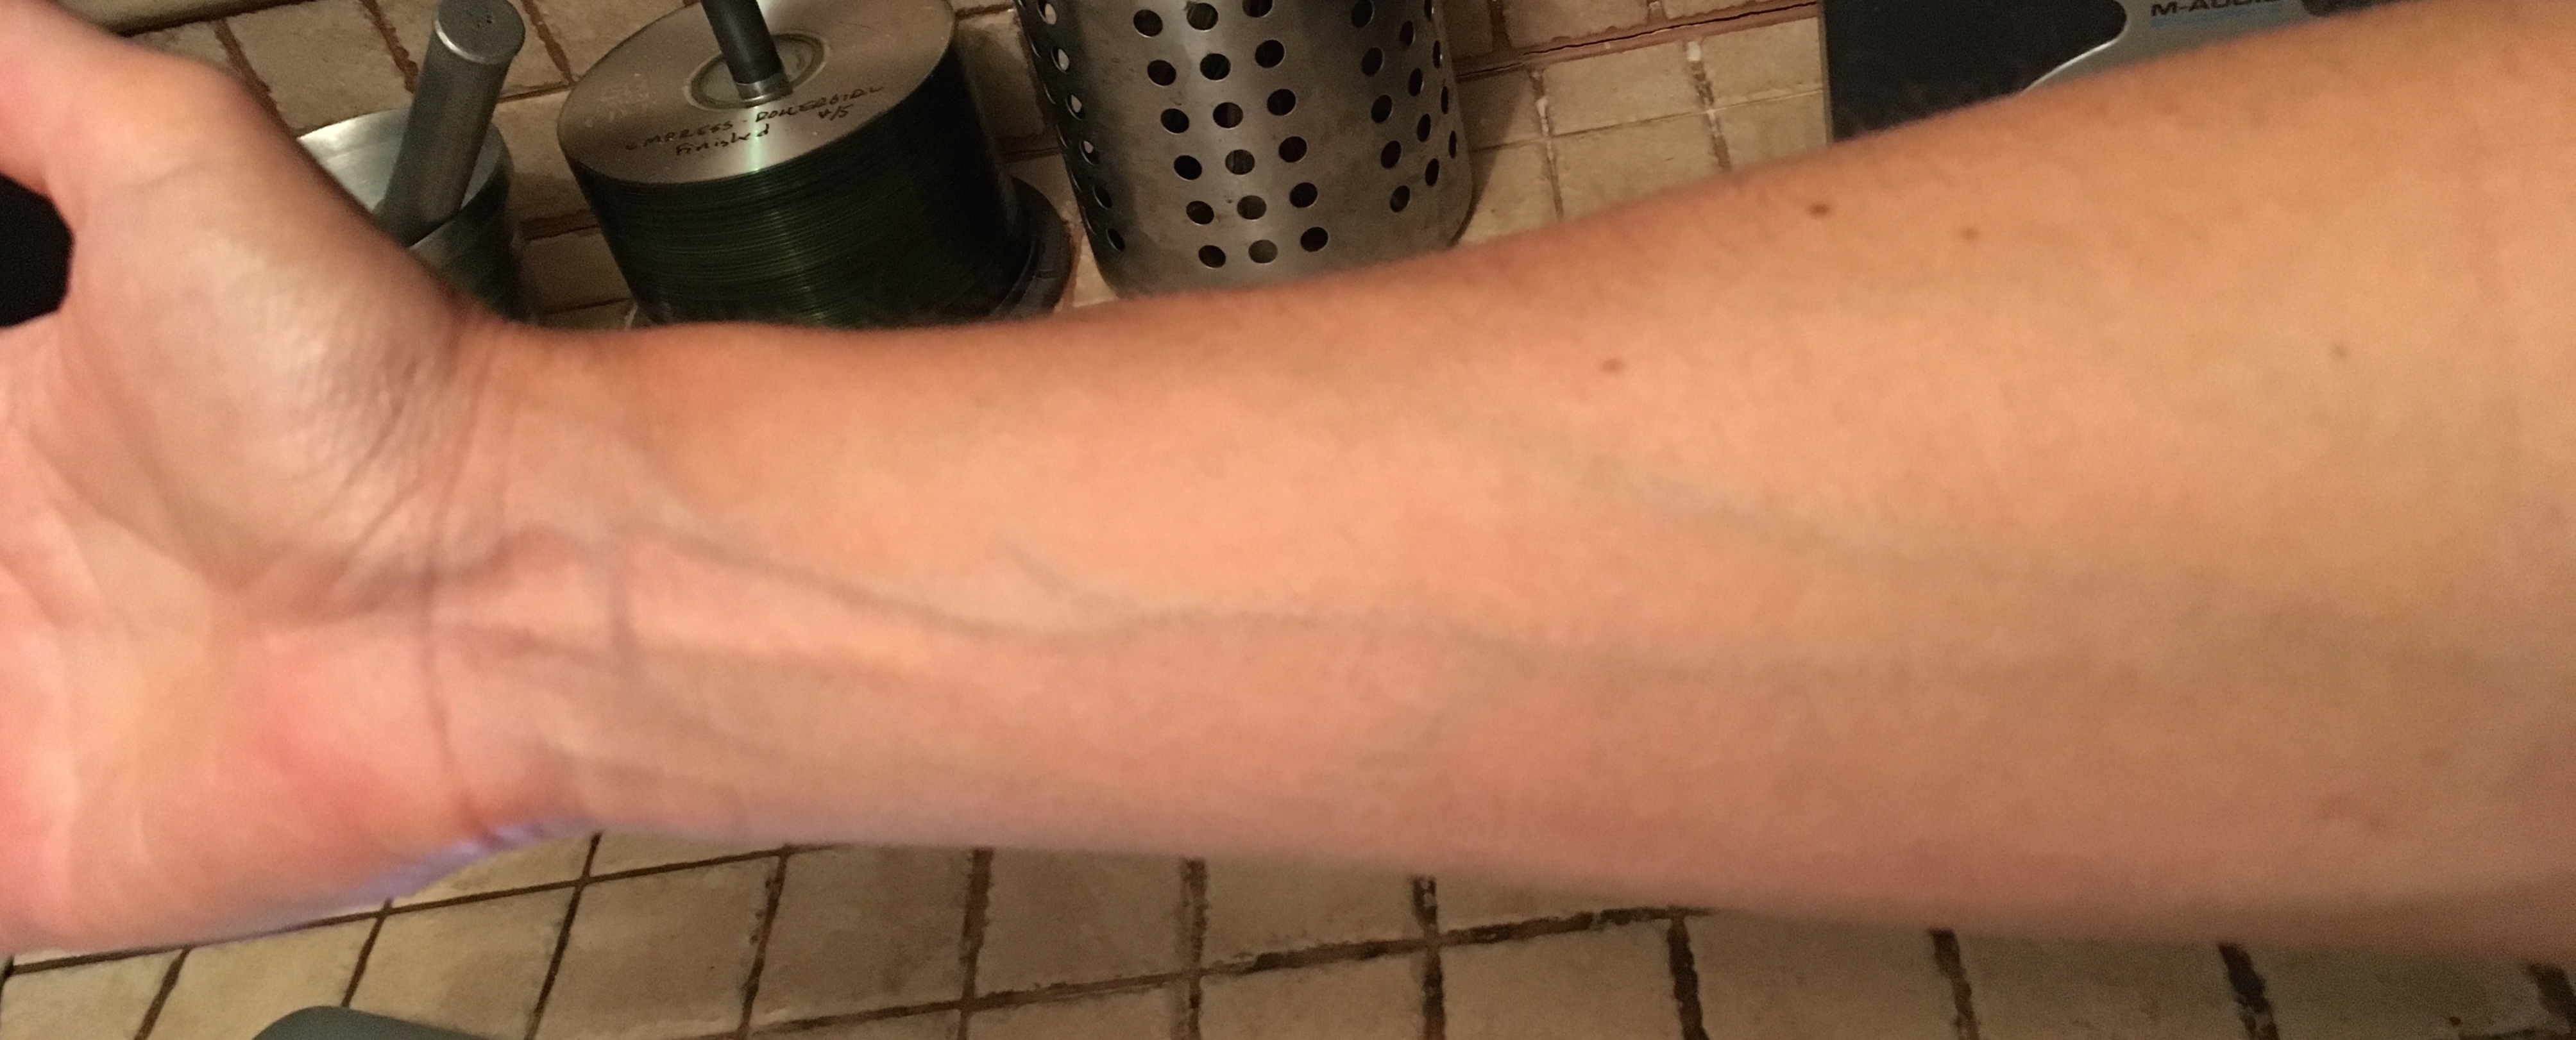 why can i see my veins